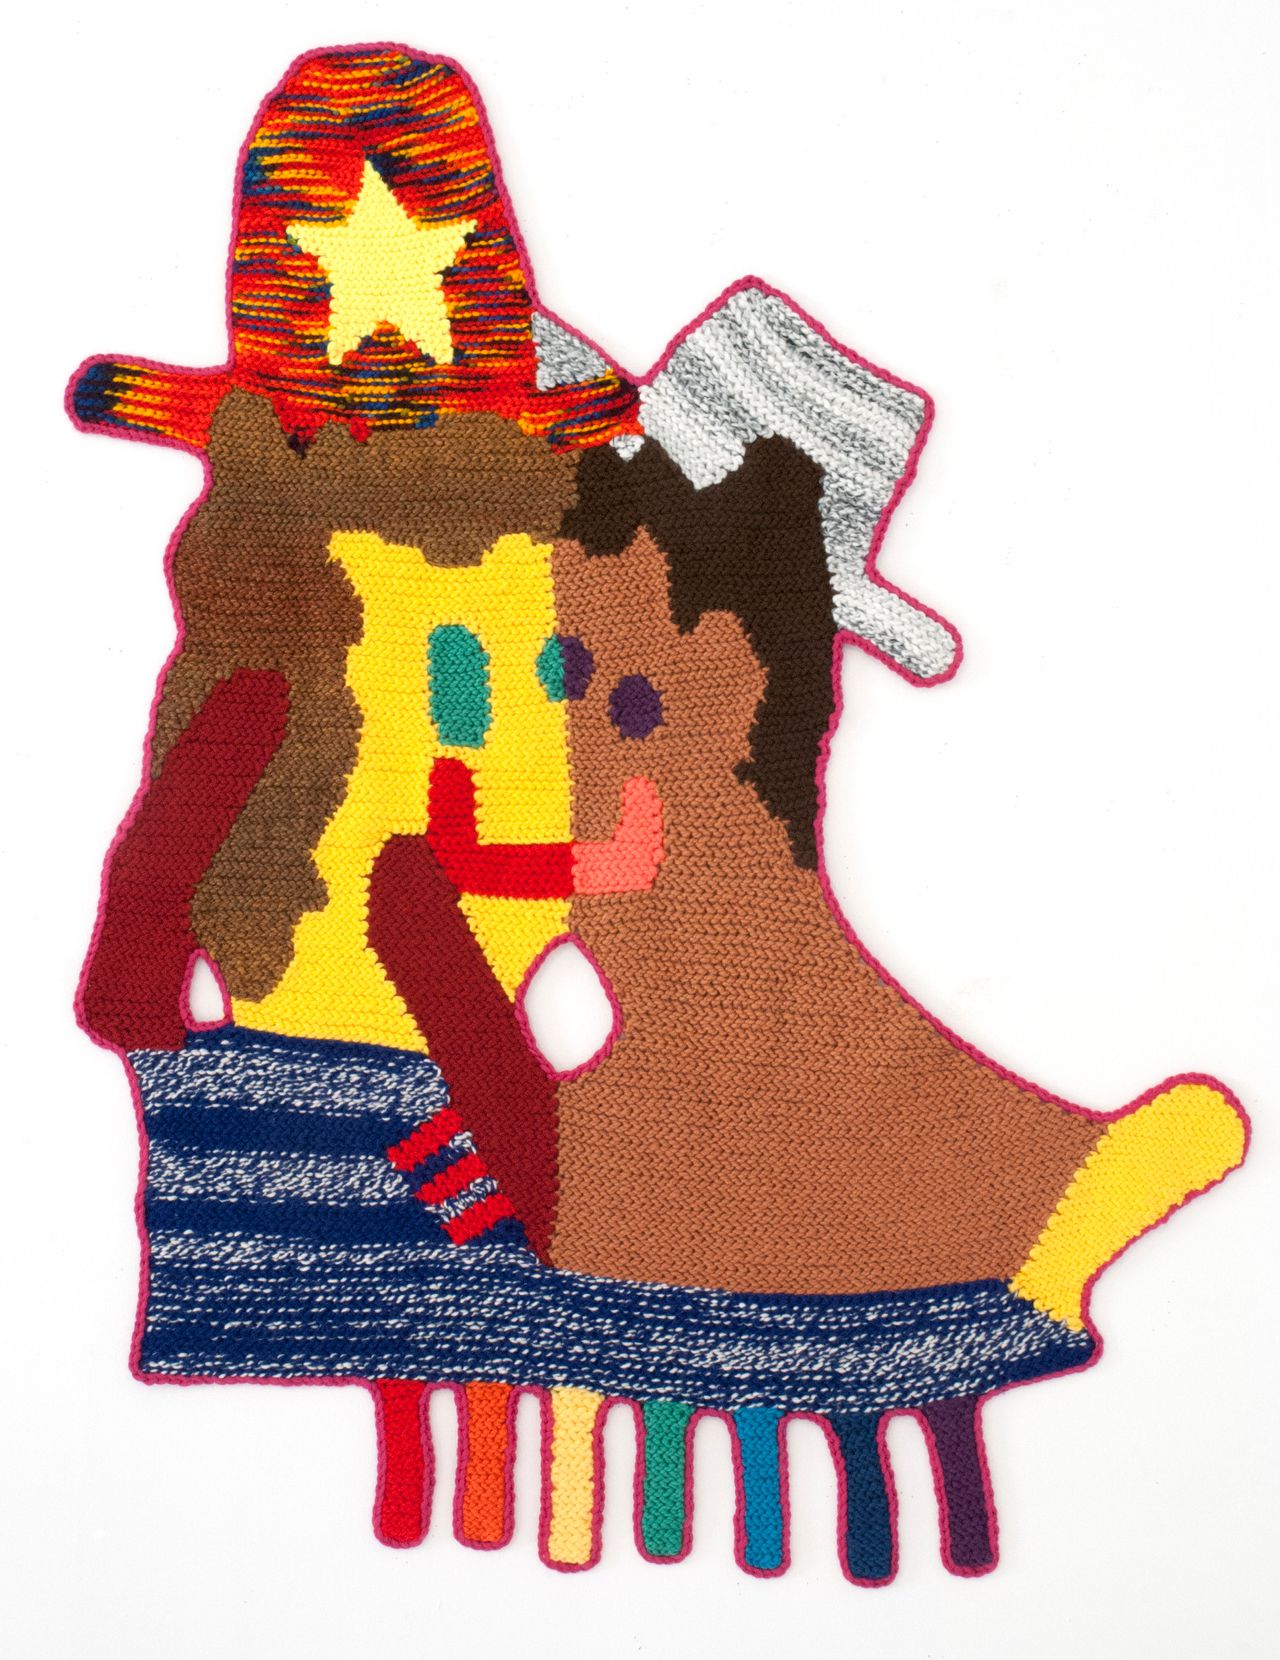 Caroline Wells Chandler, “There’s a New Sheriff in Town,” 2015, Hand crocheted assorted fiber, 58 x 48 inches